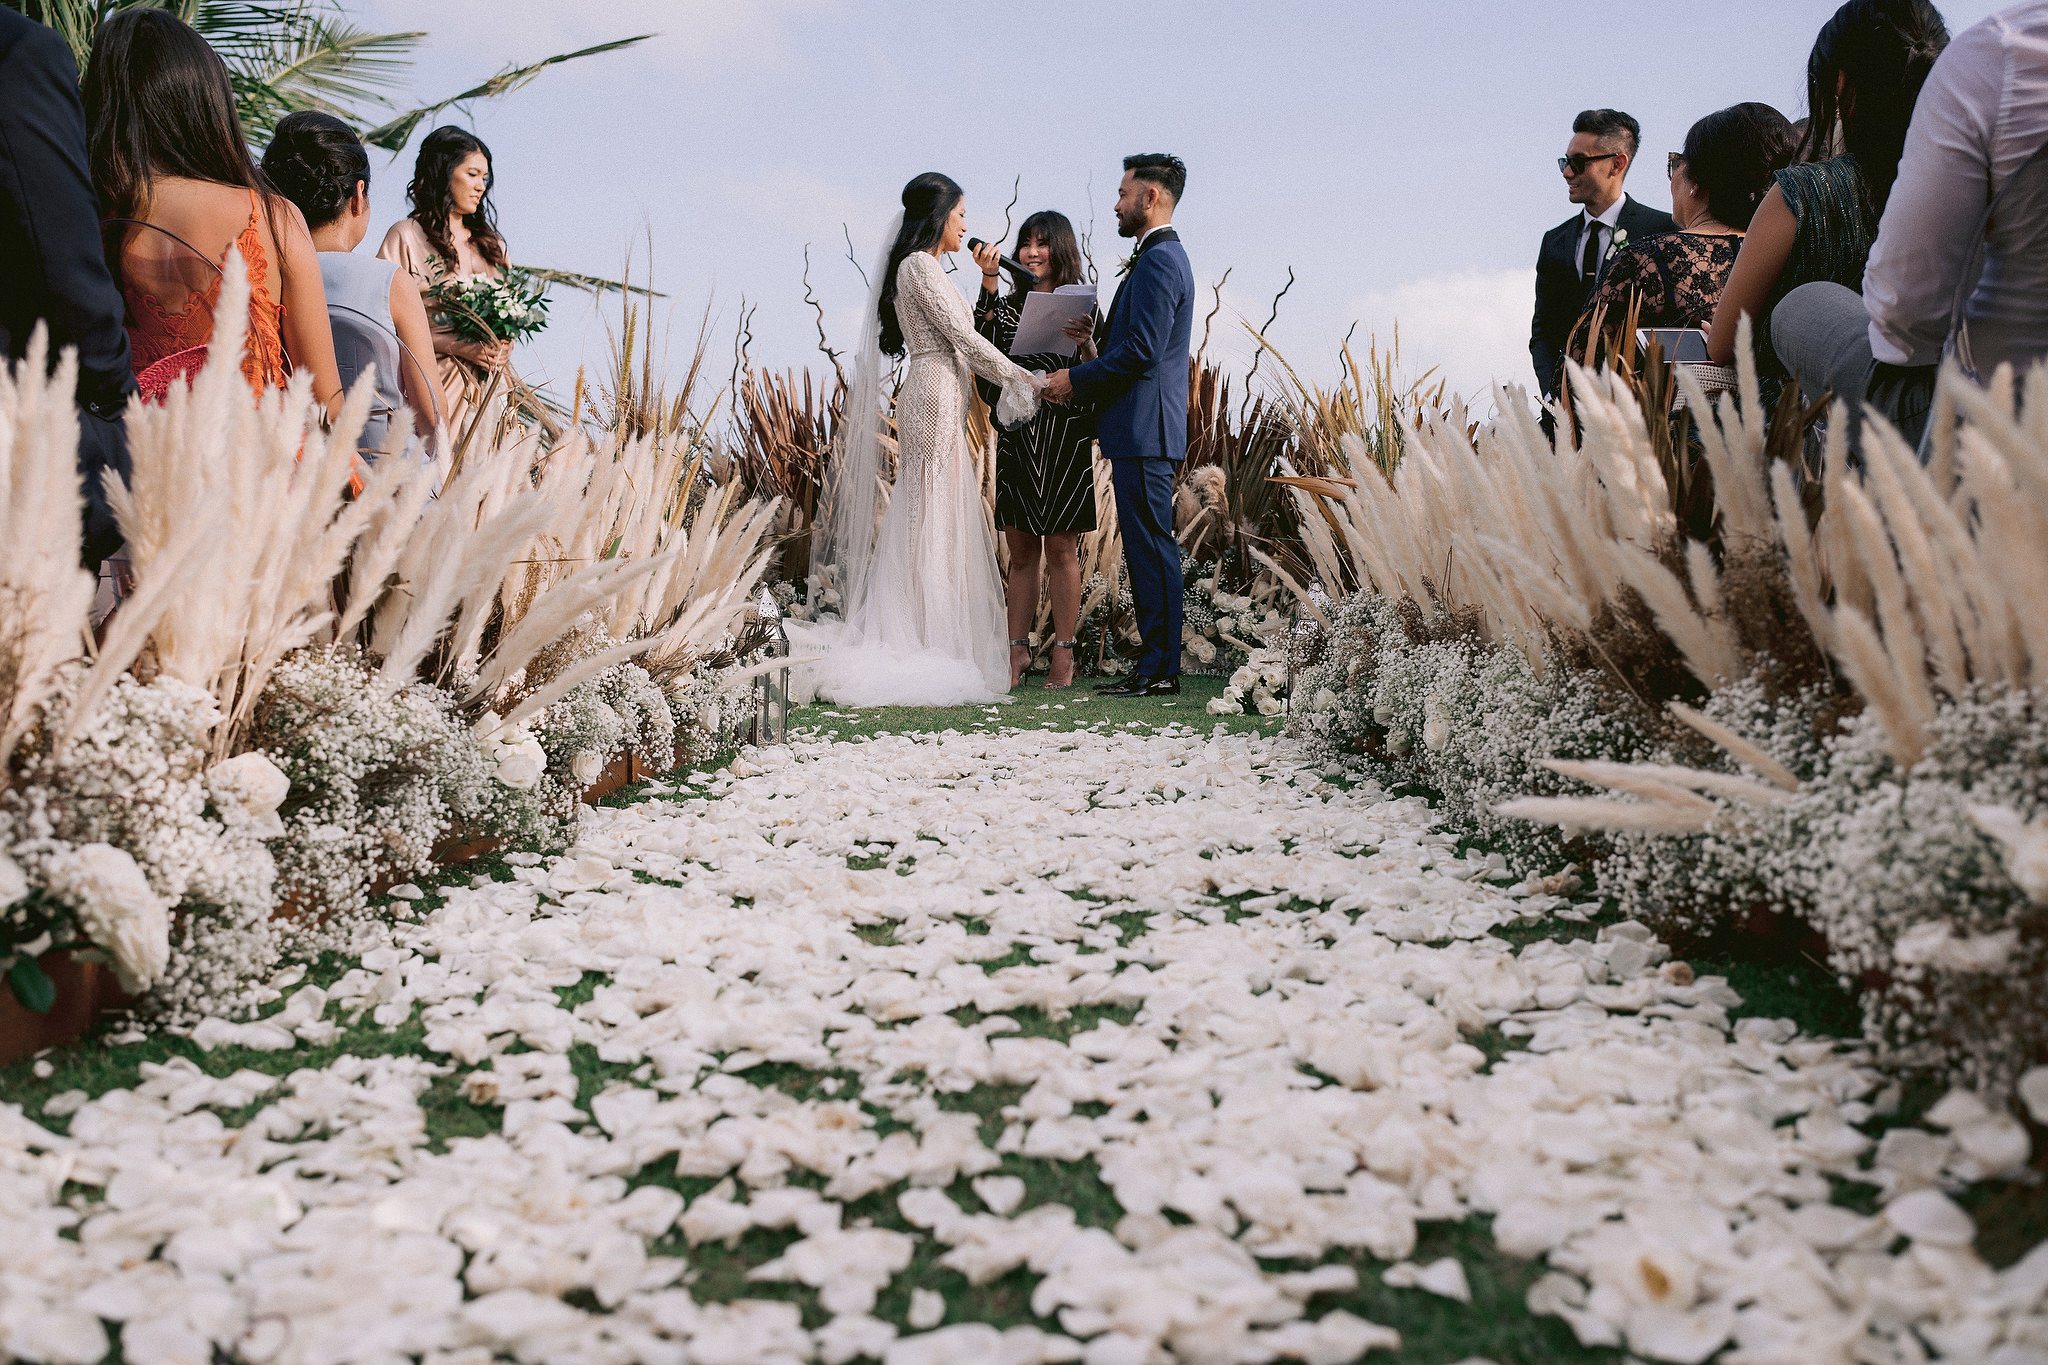 The bride is saying her wedding vows in  a ceremony in Bali, Indonesia. Editorial photo by Jenny Fu Studio